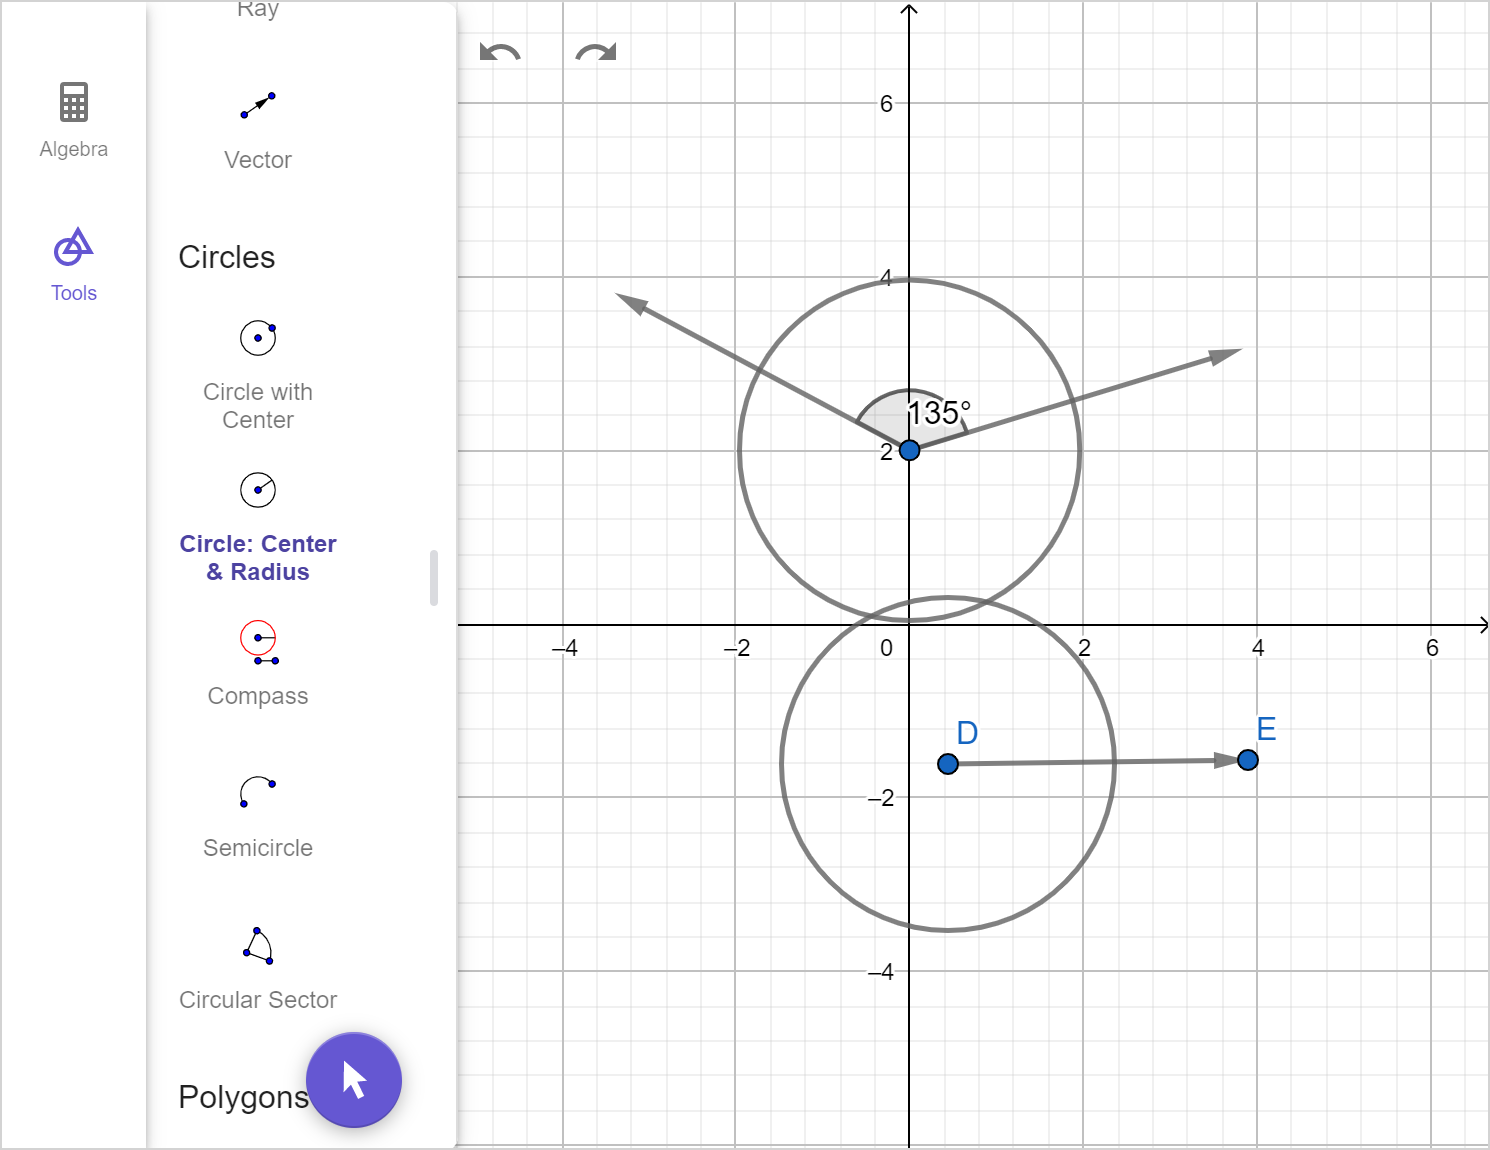 A screenshot of the GeoGebra geometry tool showing the previous image with circles drawn around two of the points. Speak to your teacher for more details.